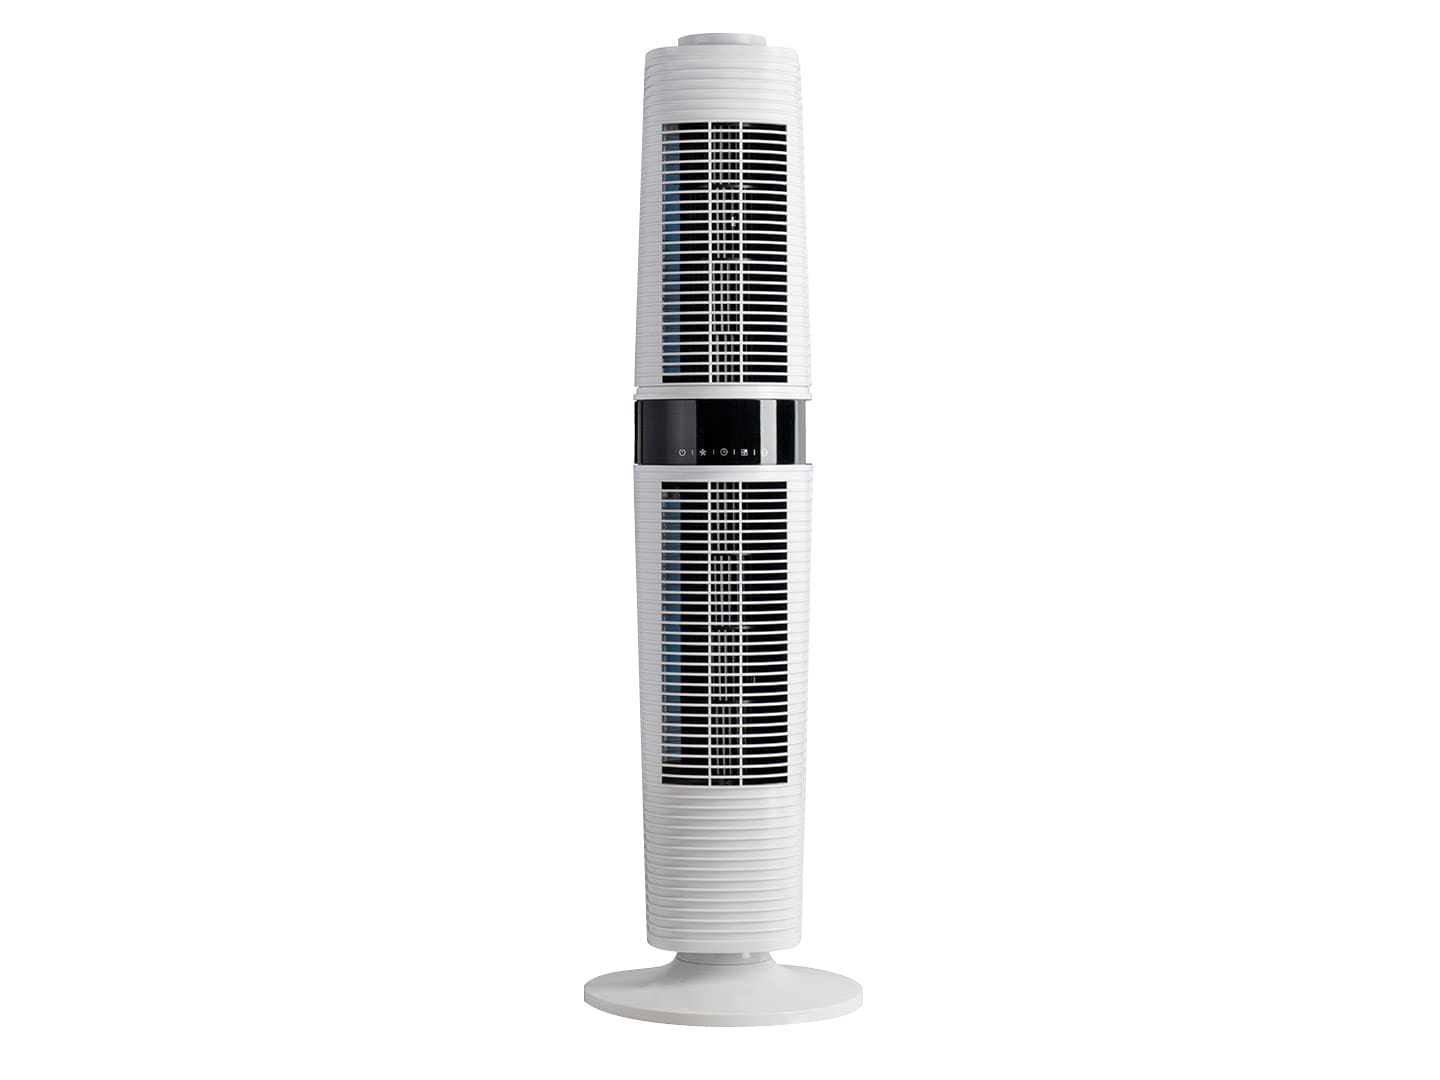 Detf122wh Tower Fan Air Treatment Delonghi New Zealand pertaining to size 1440 X 1080